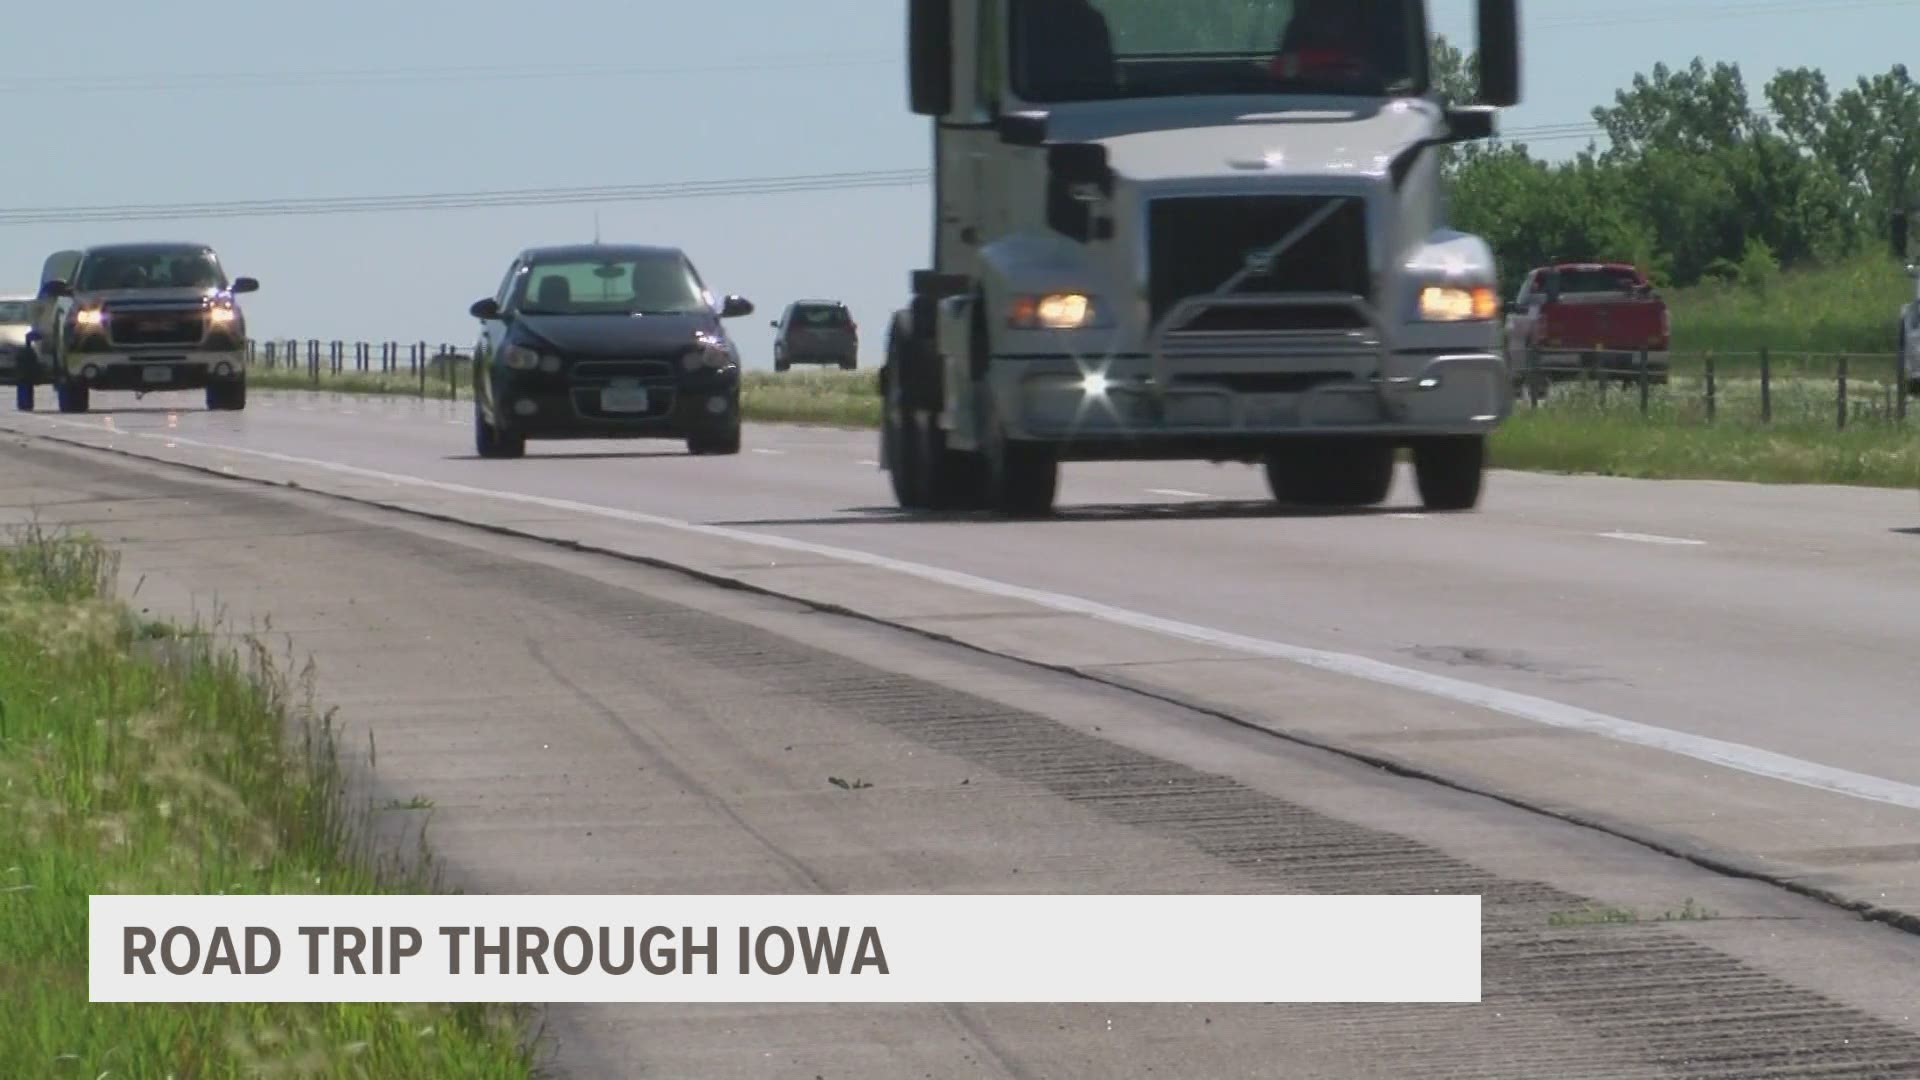 Travel Iowa is encouraging people to explore the state during the last week of July to increase tourism levels. They're also offering incentives for people to do so.